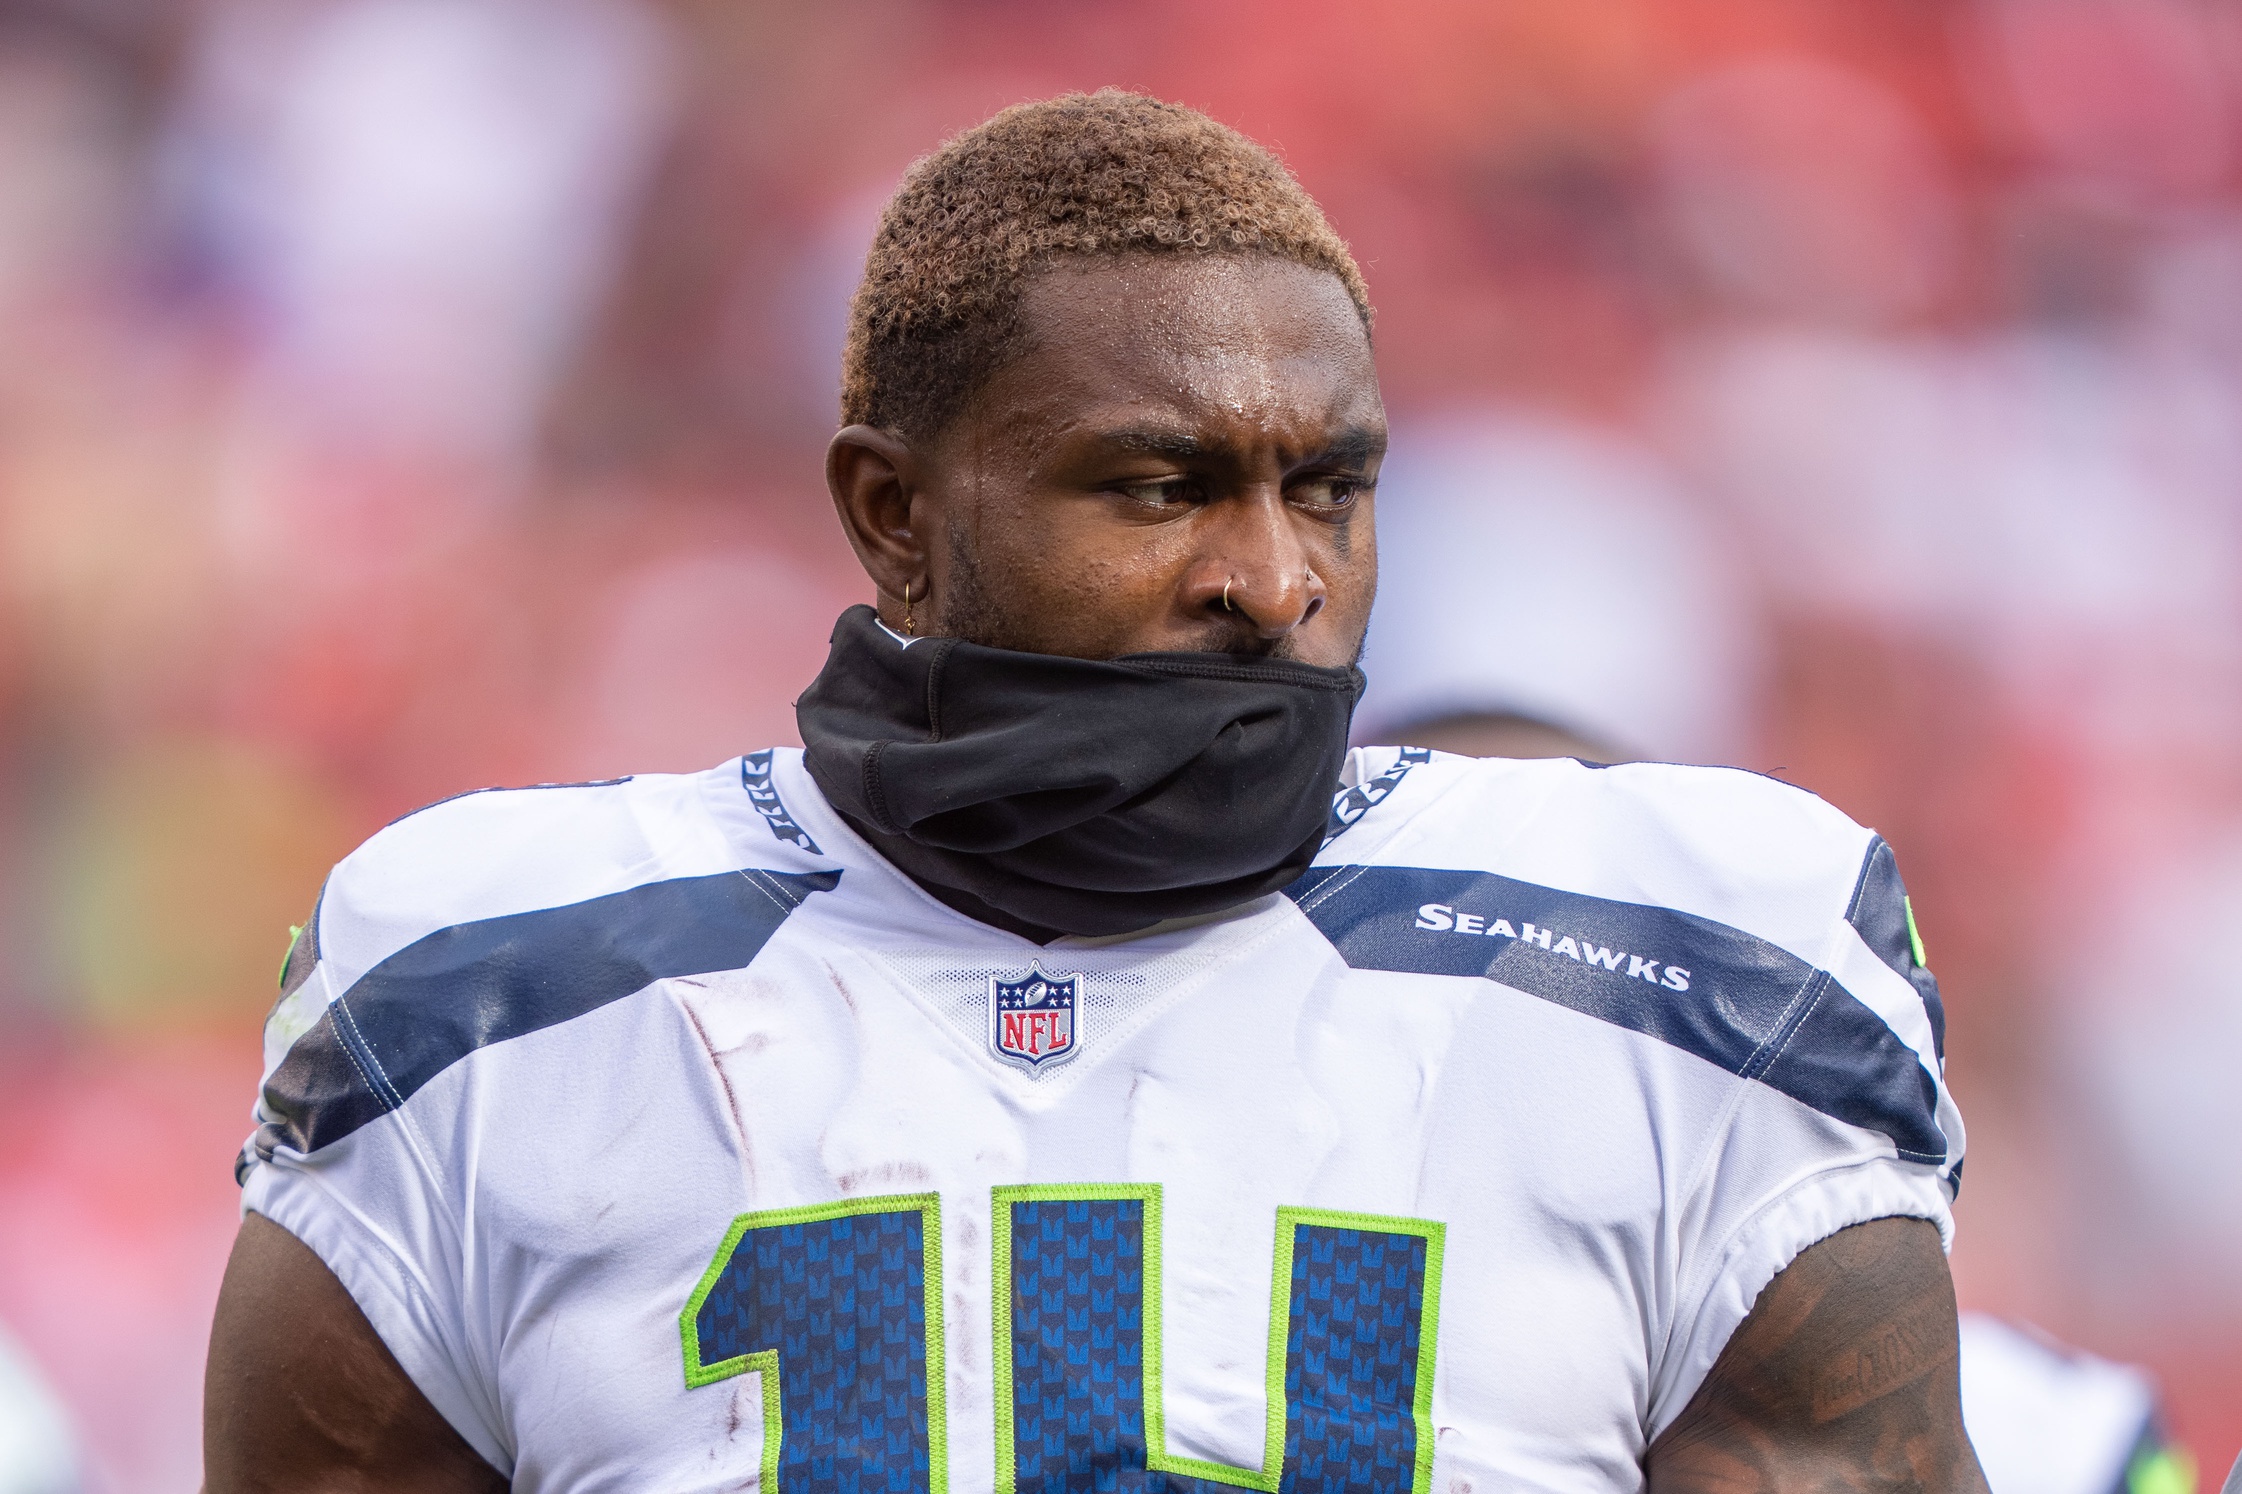 Seahawks WR DK Metcalf Ruled Out With Knee Injury